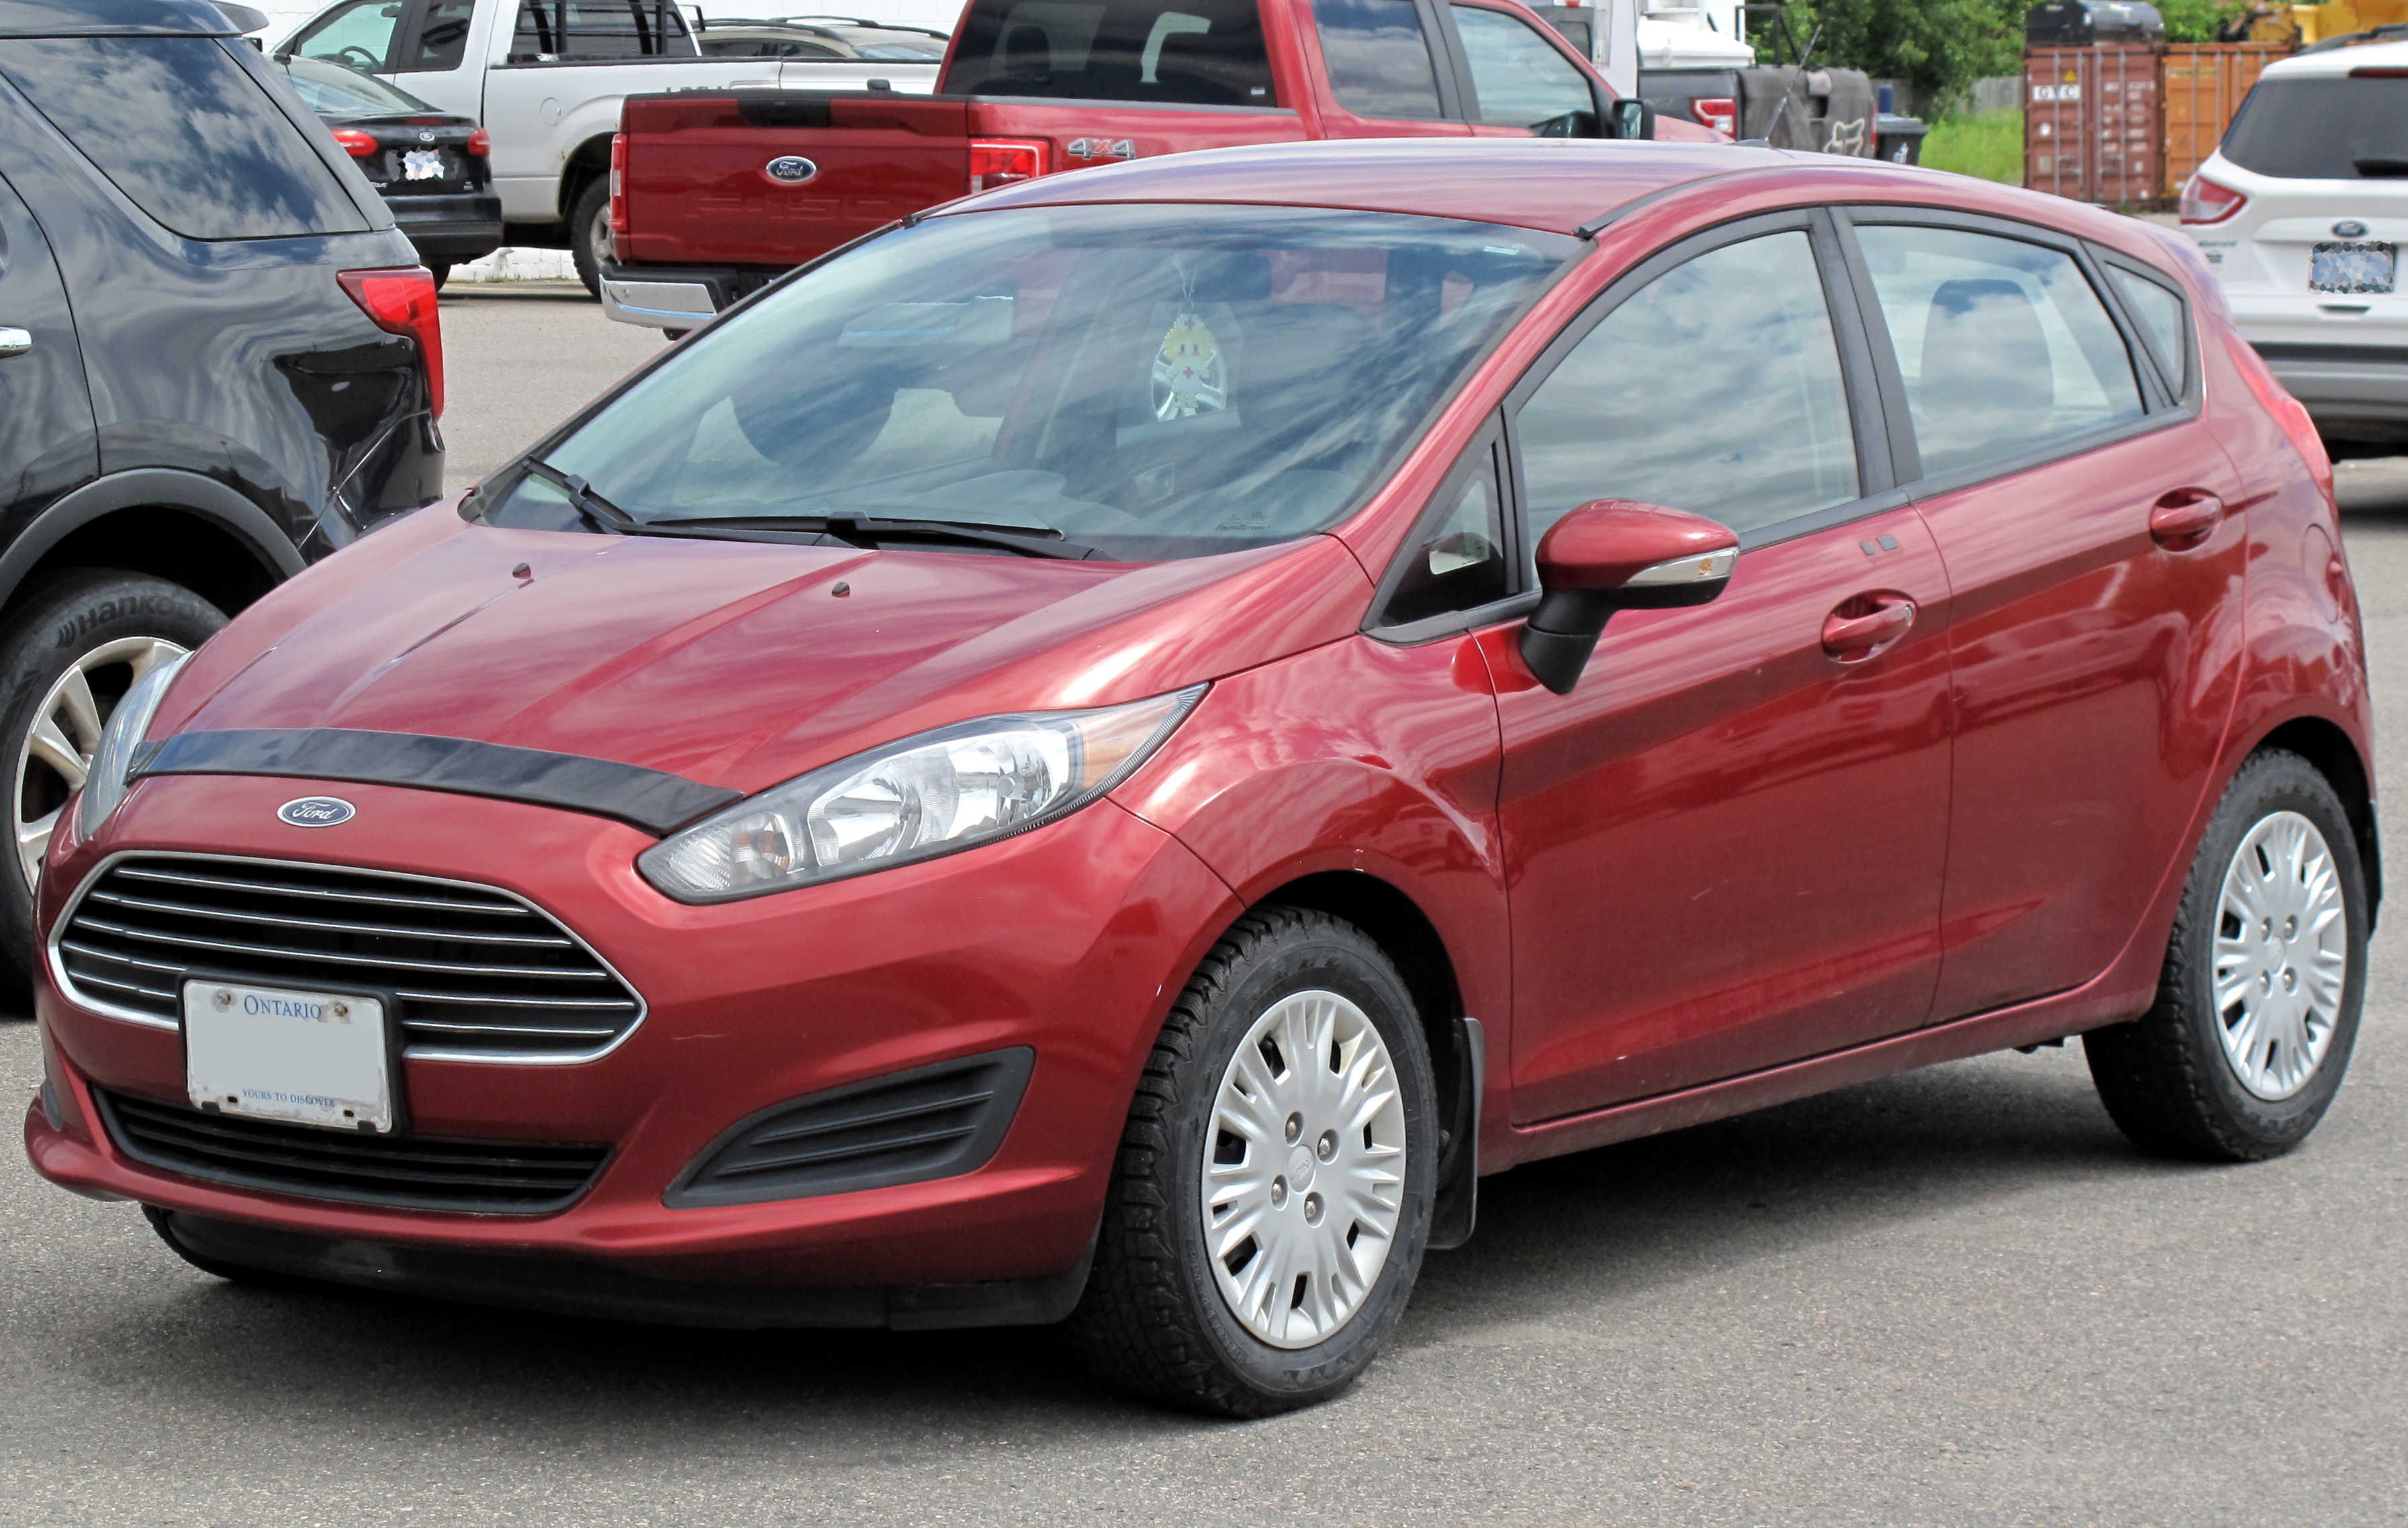 File:2014 Ford Fiesta SE in Ruby Red Metallic Tinted Clearcoat, Left, - Wikimedia Commons